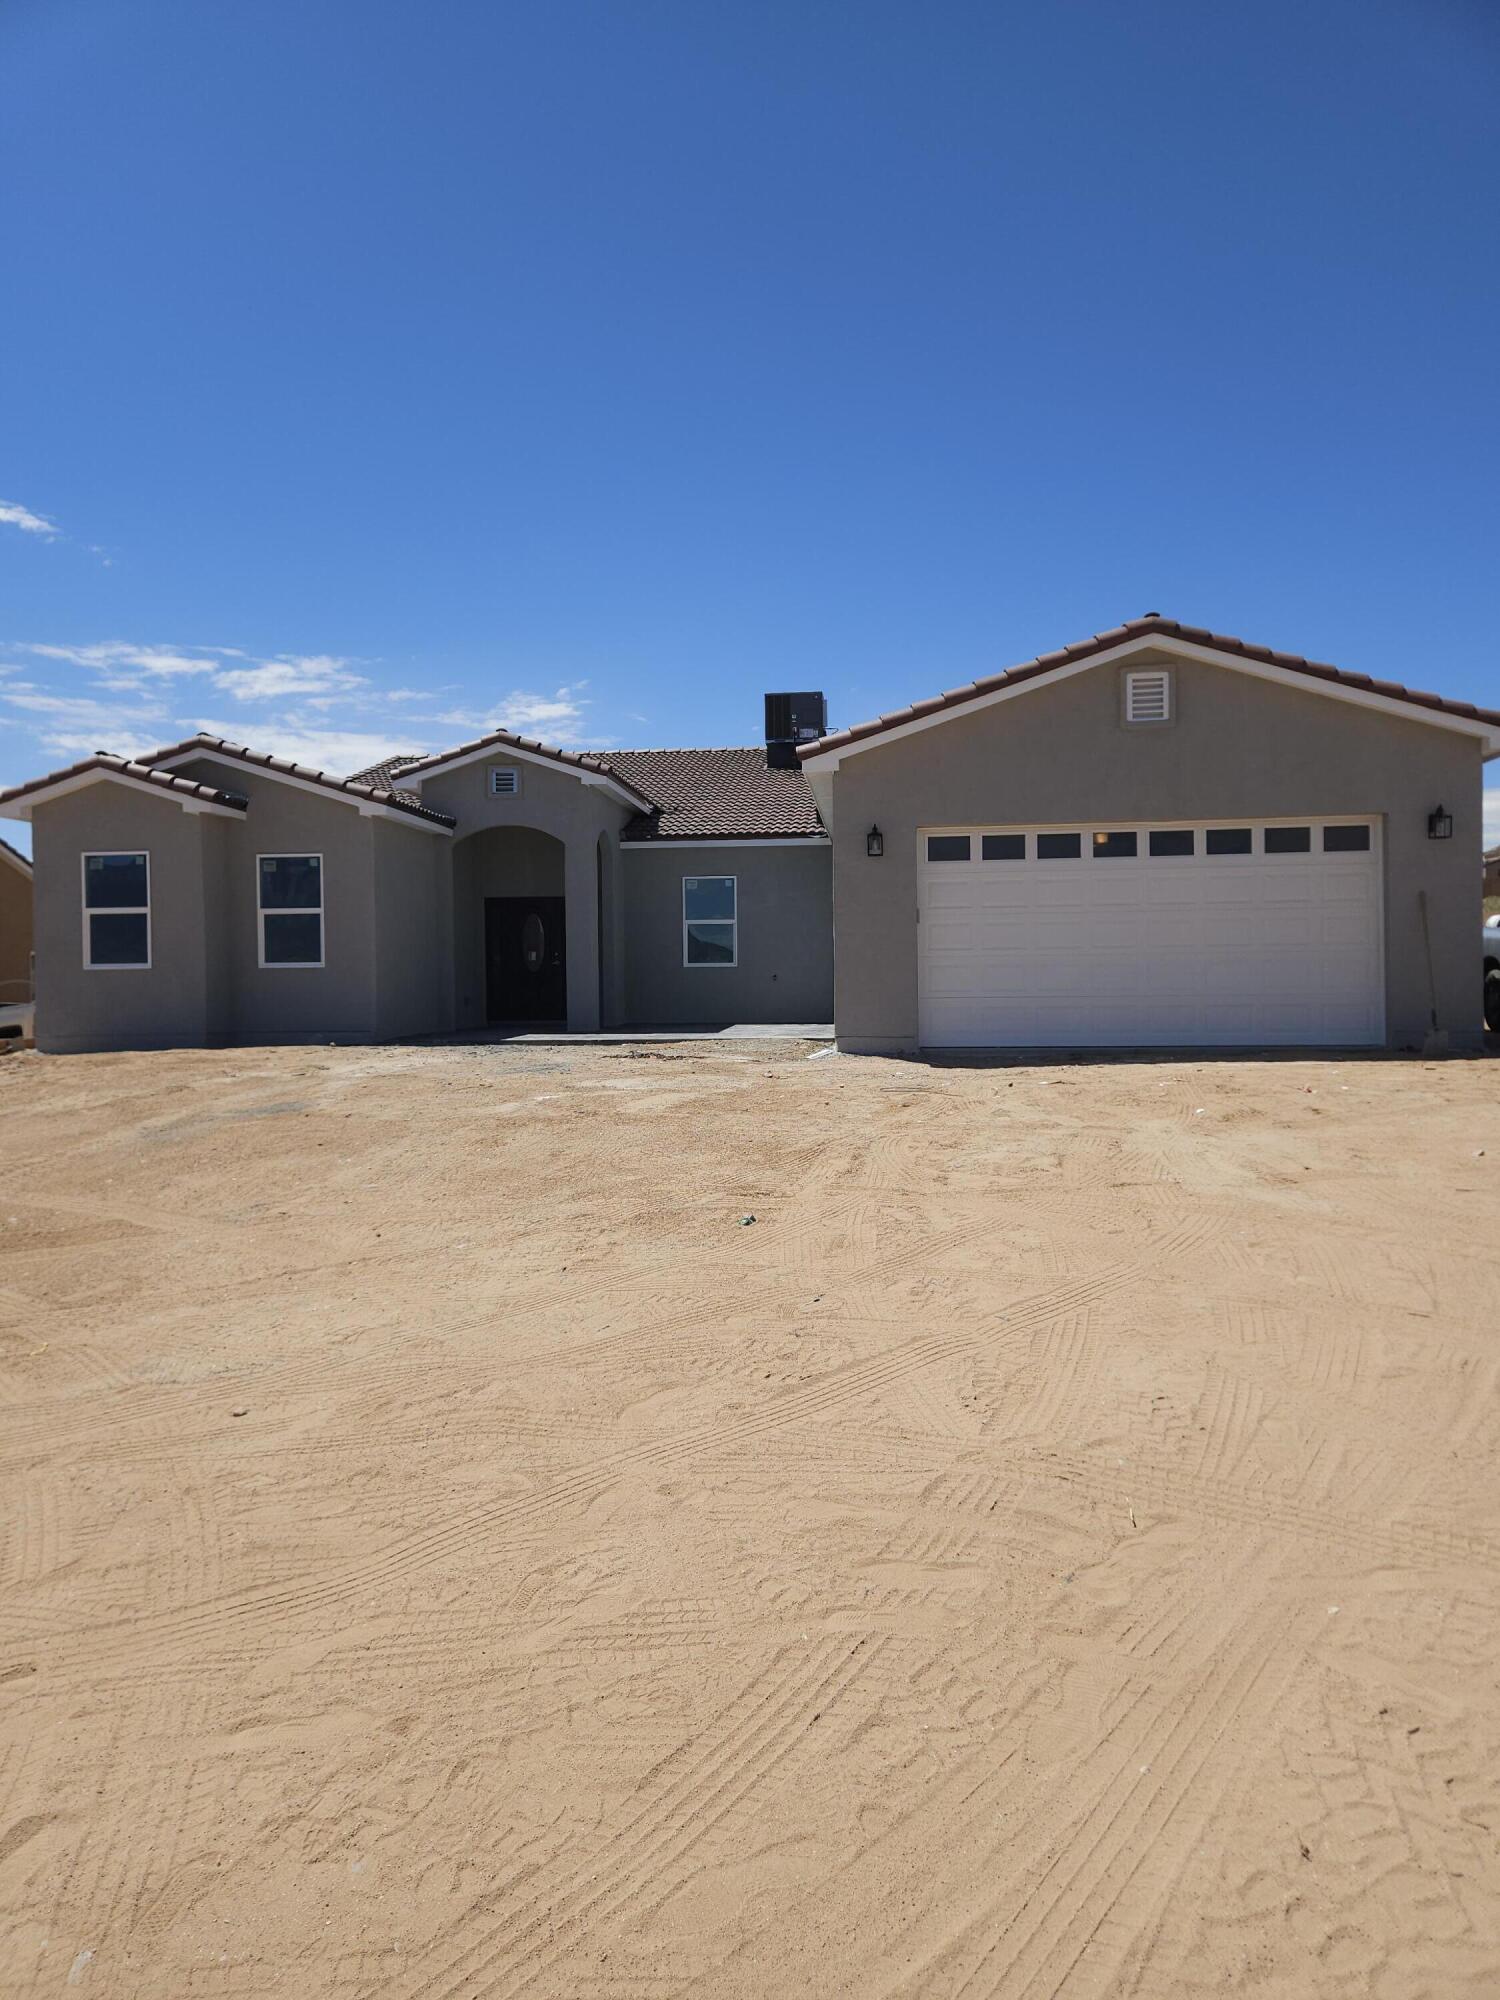 Beautiful New Construction in Rio Rancho. Currently under construction schedule your showing to see this Beautiful new listing.